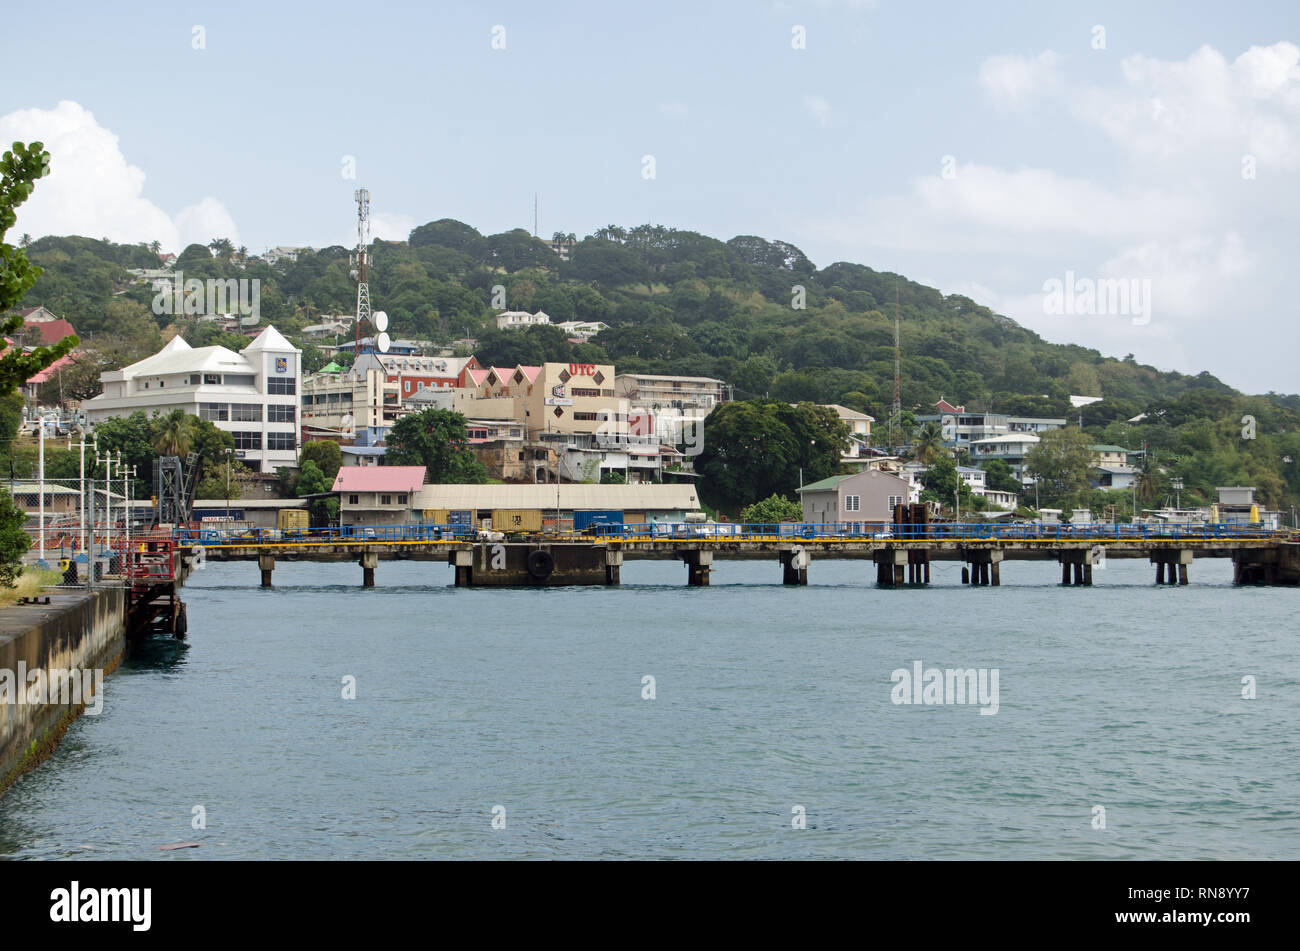 SCARBOROUGH, TRINIDAD AND TOBAGO - JANUARY 11, 2019:  Waterfront and pier at Scarborough on a cloudy afternoon. Stock Photo